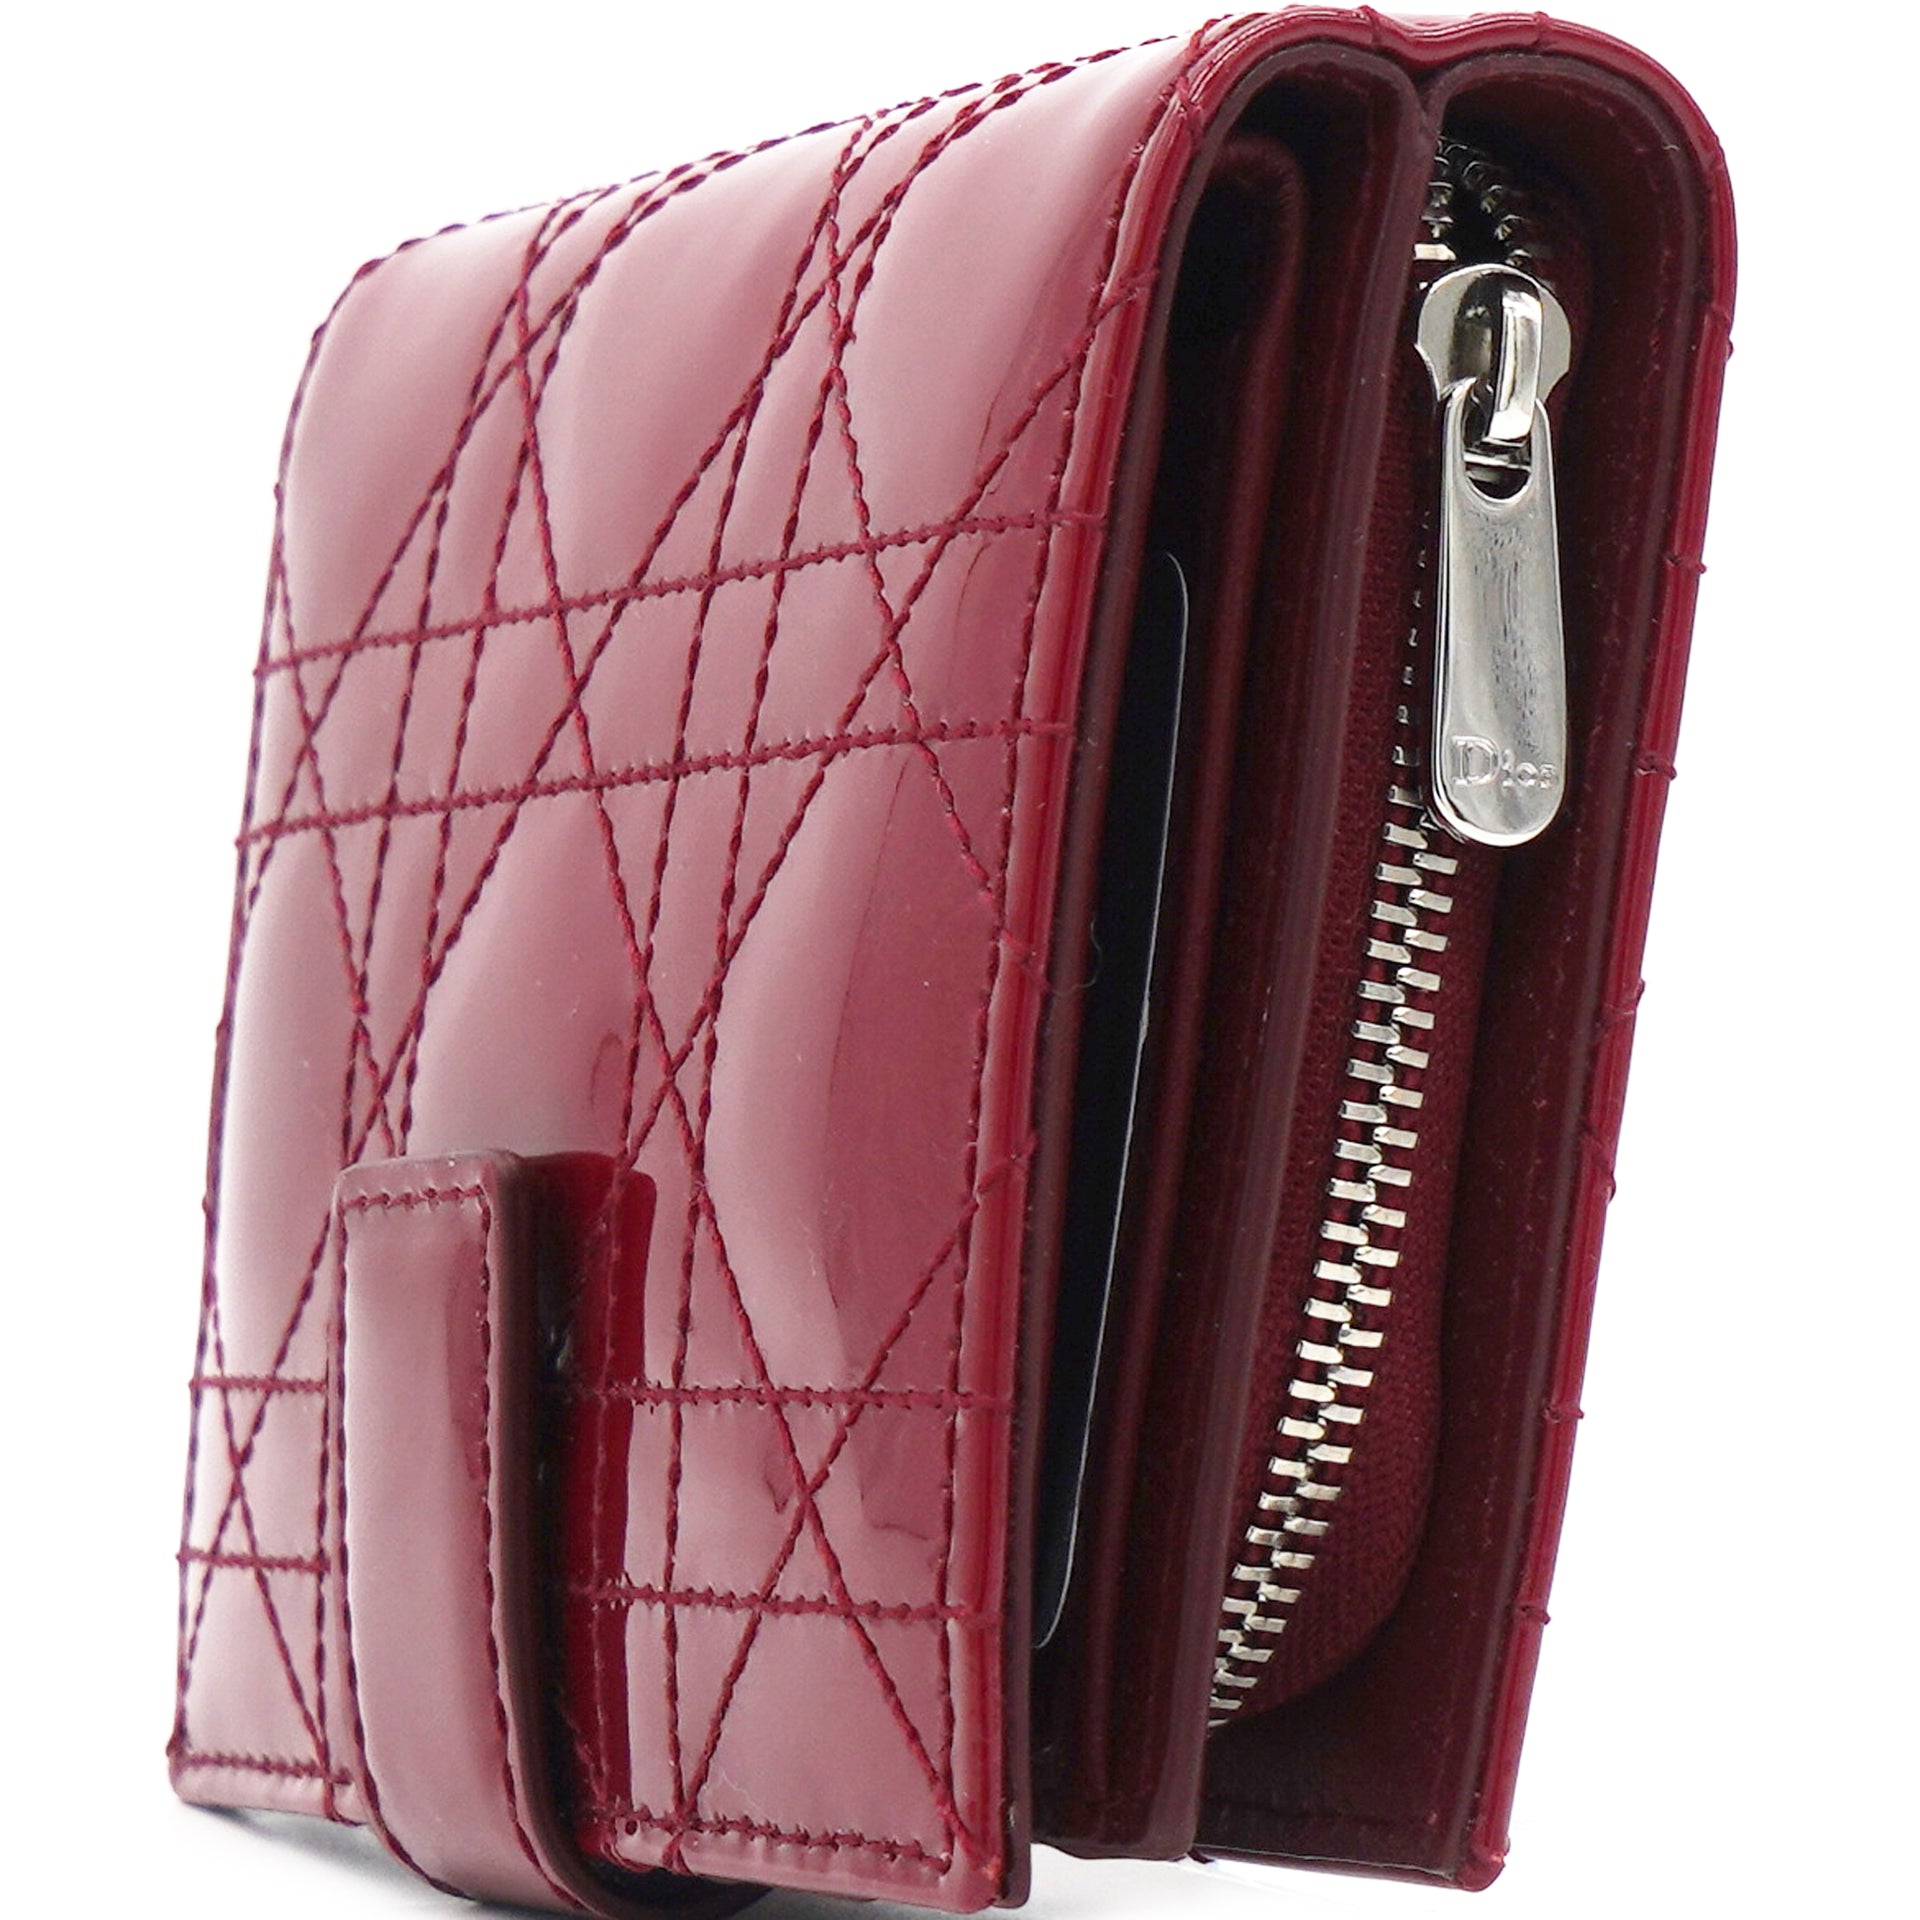 Dior Lady Dior cardholder Patent Leather Red